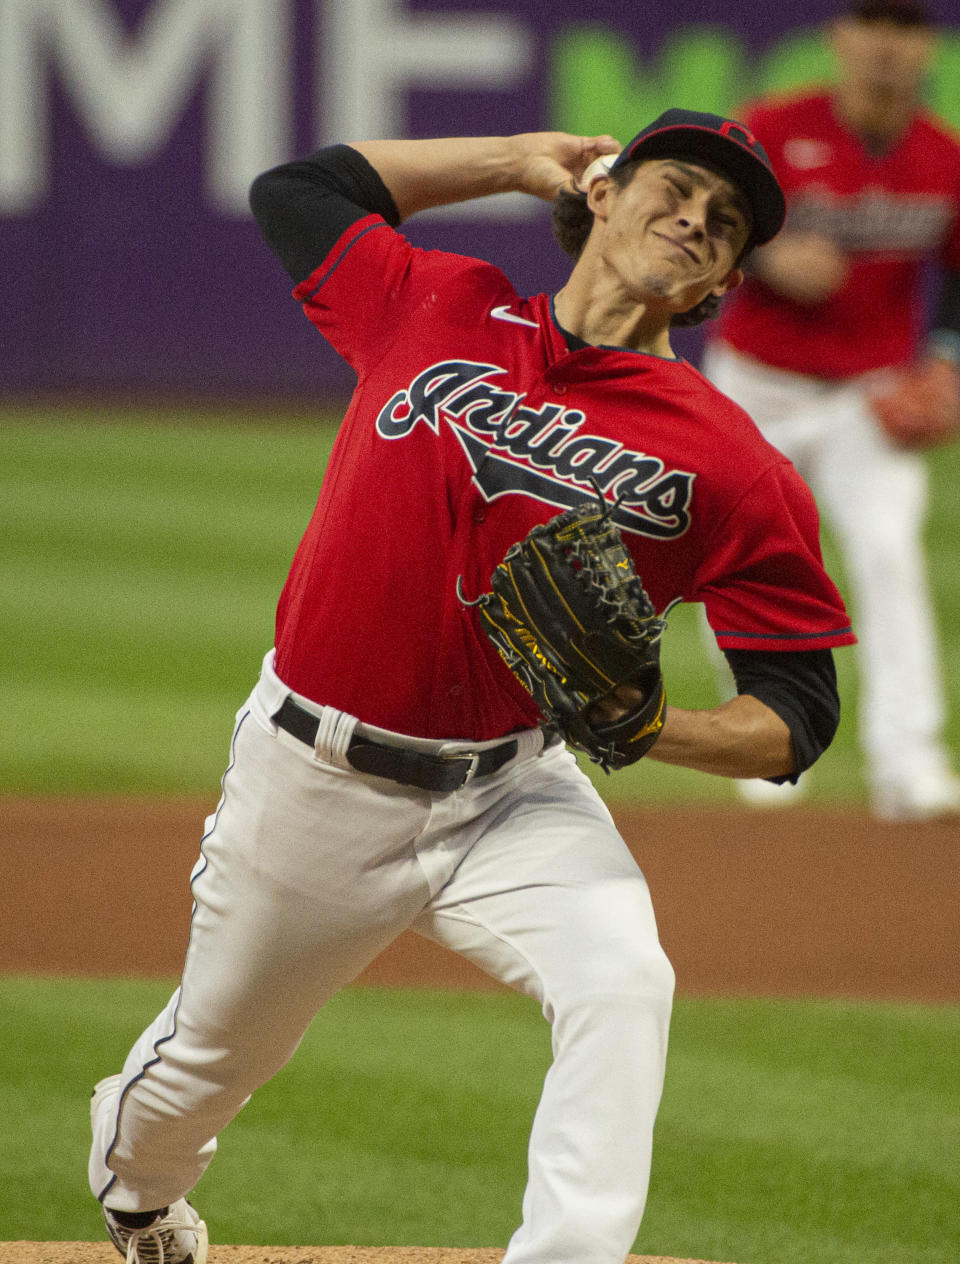 Cleveland Indians starting pitcher Eli Morgan delivers against the Chicago White Sox during the first inning of a baseball game in Cleveland, Saturday, Sept. 25, 2021. (AP Photo/Phil Long)